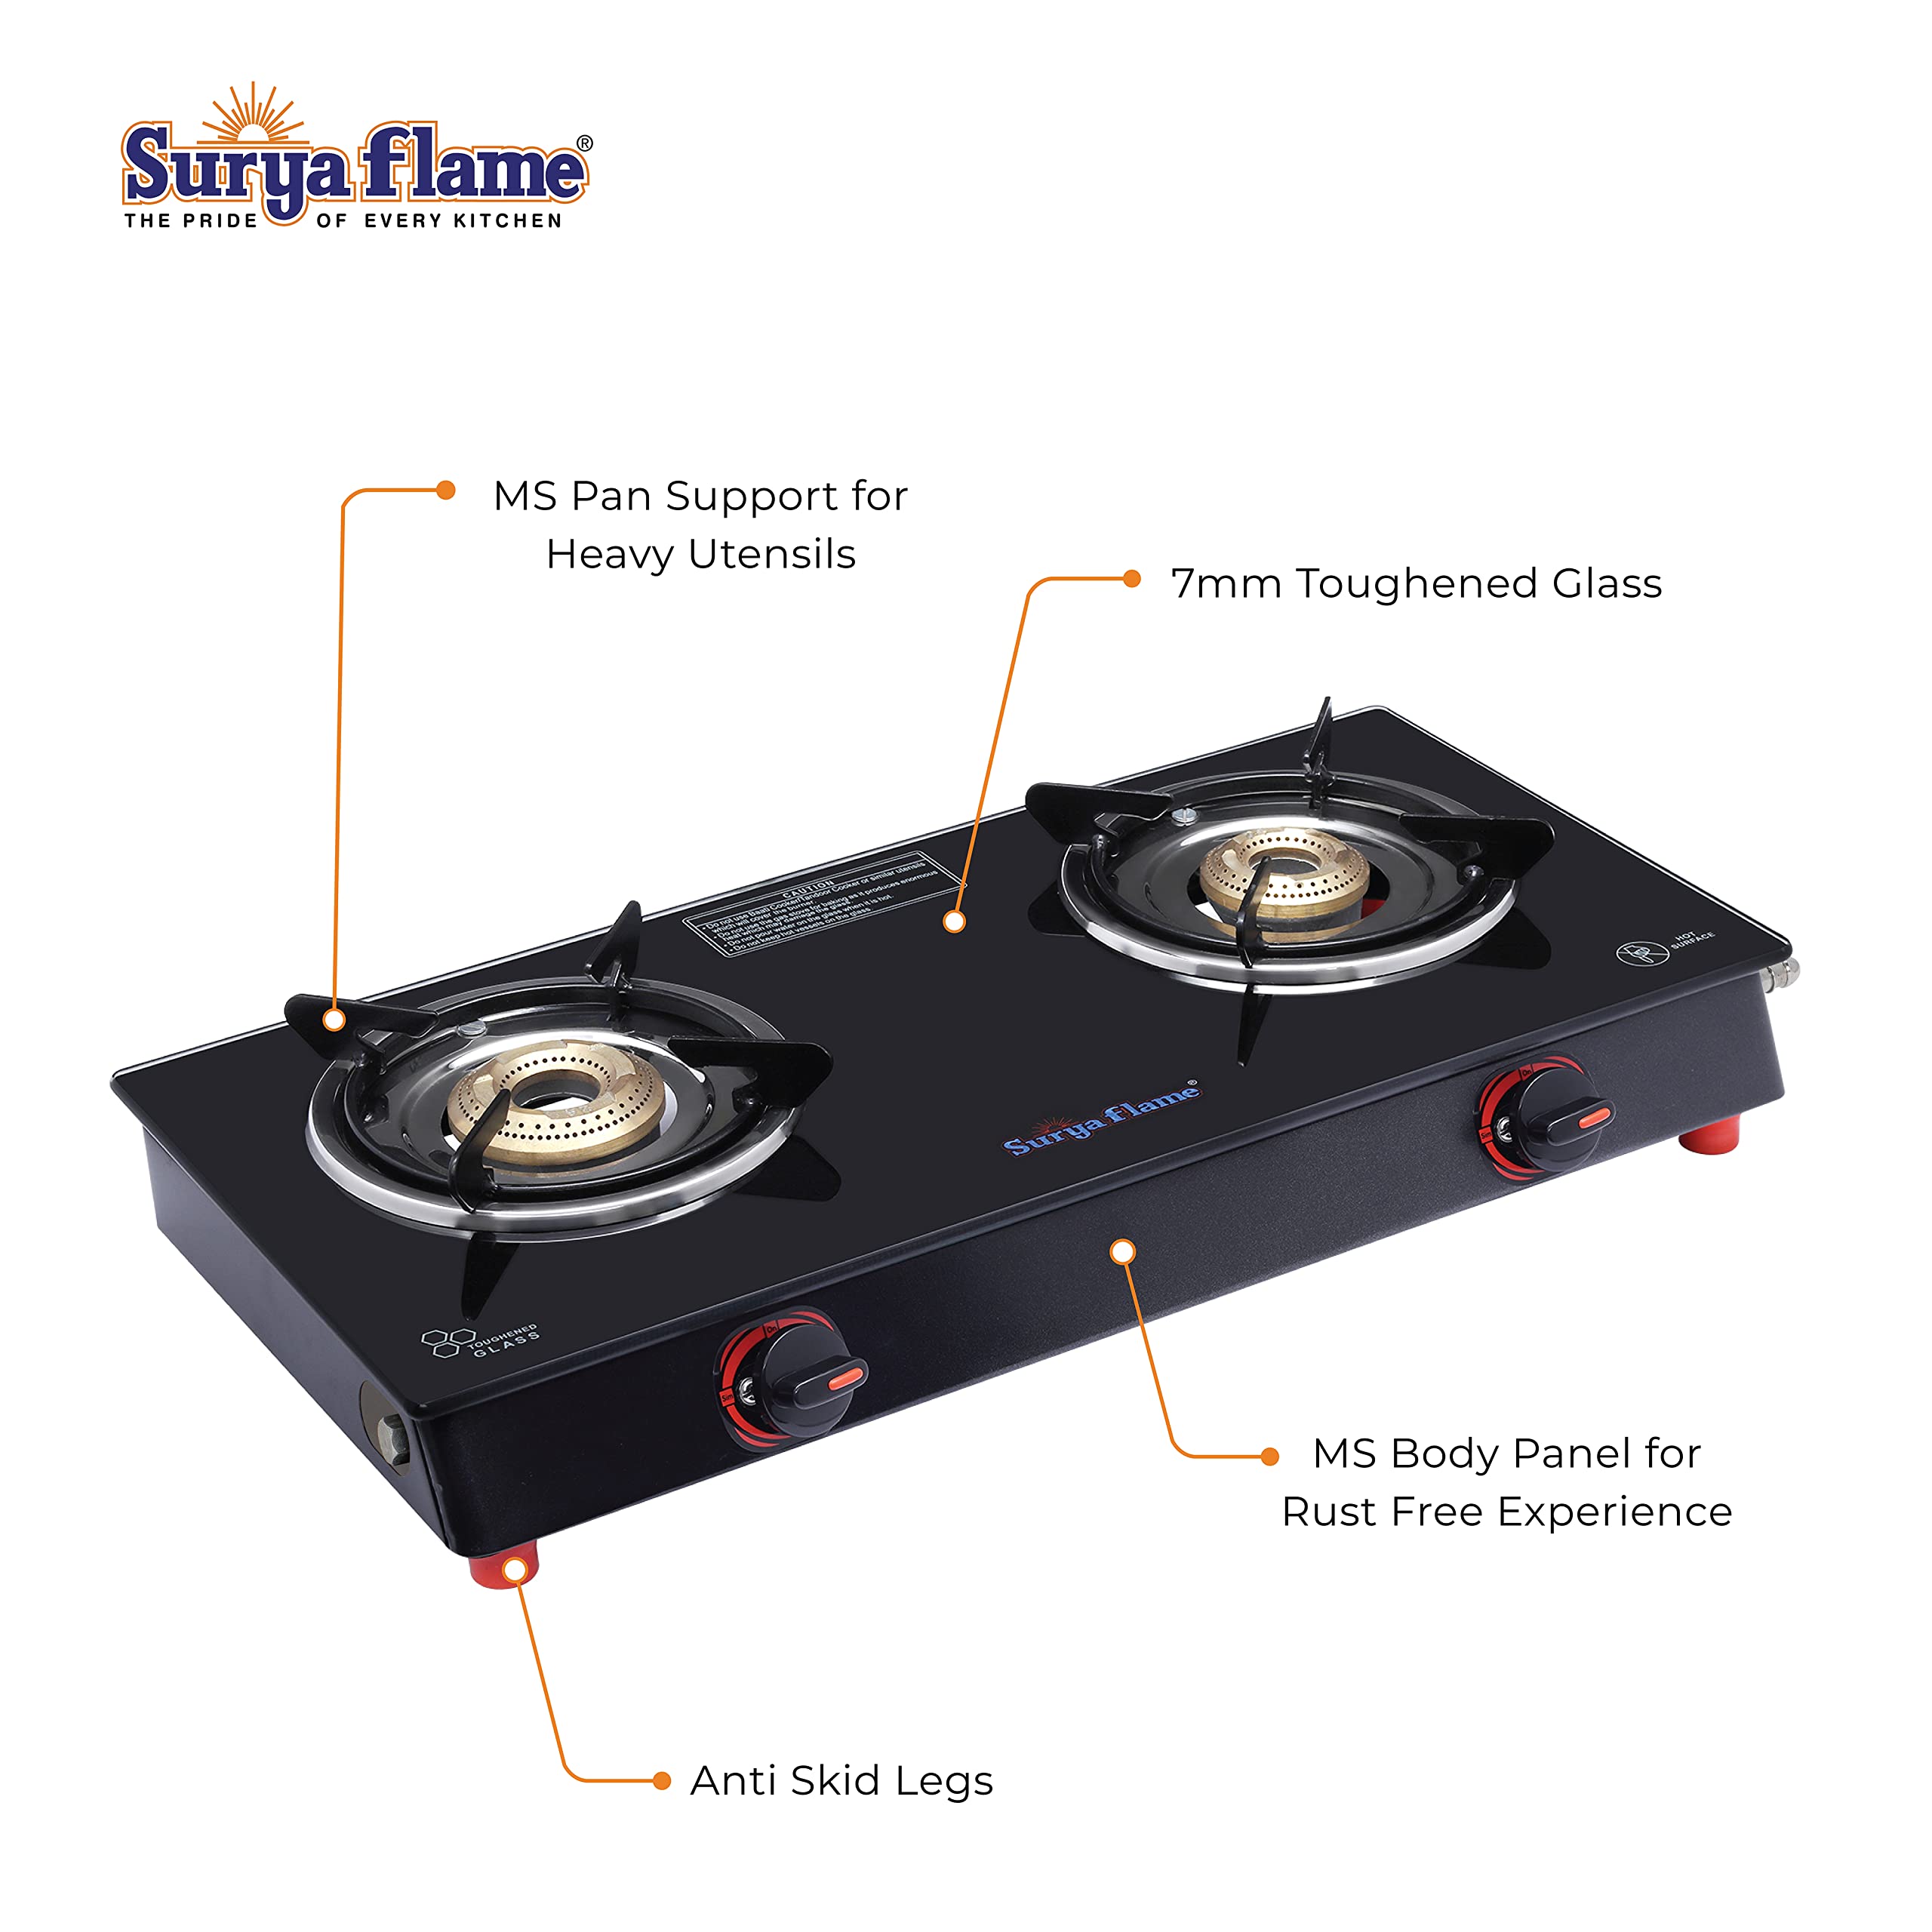 Surya Flame Smart Gas Stove 2 Burners Glass Top | Black Body PNG Stove With 69% Thermal Efficiency | Anti Skid Rubber Legs - 2 Years Complete Doorstep Warranty